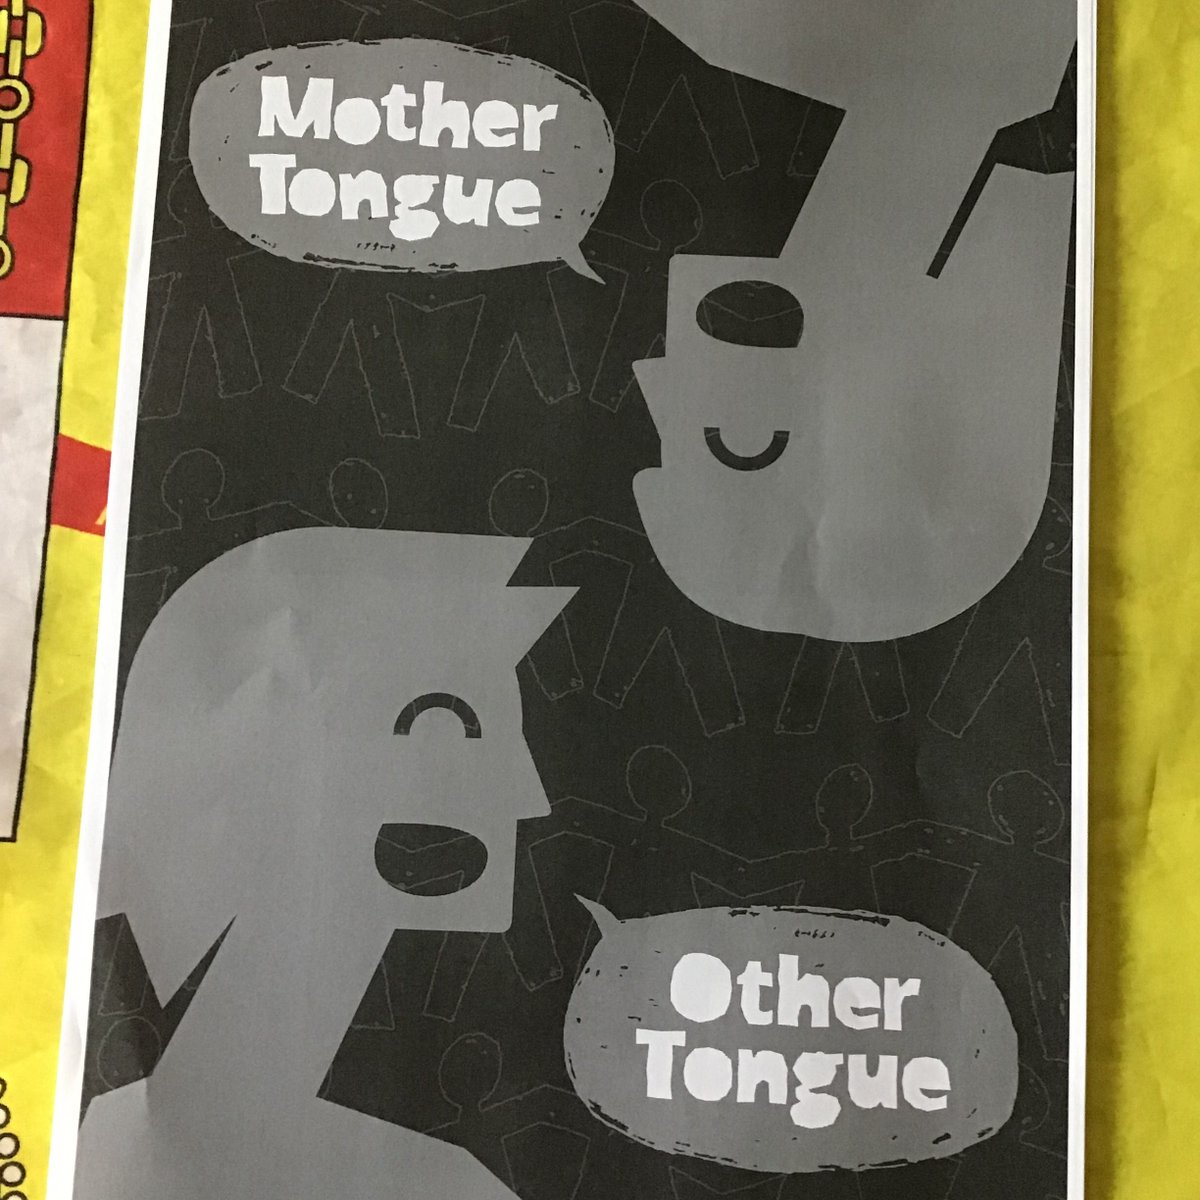 A huge congratulations to Oliver in Year 11, who entered the Leeds Year of Culture 2023 'Mother Tongue Other Tongue' foreign language poetry competition and has had his Spanish poem published in the official anthology! ¡Bien hecho!